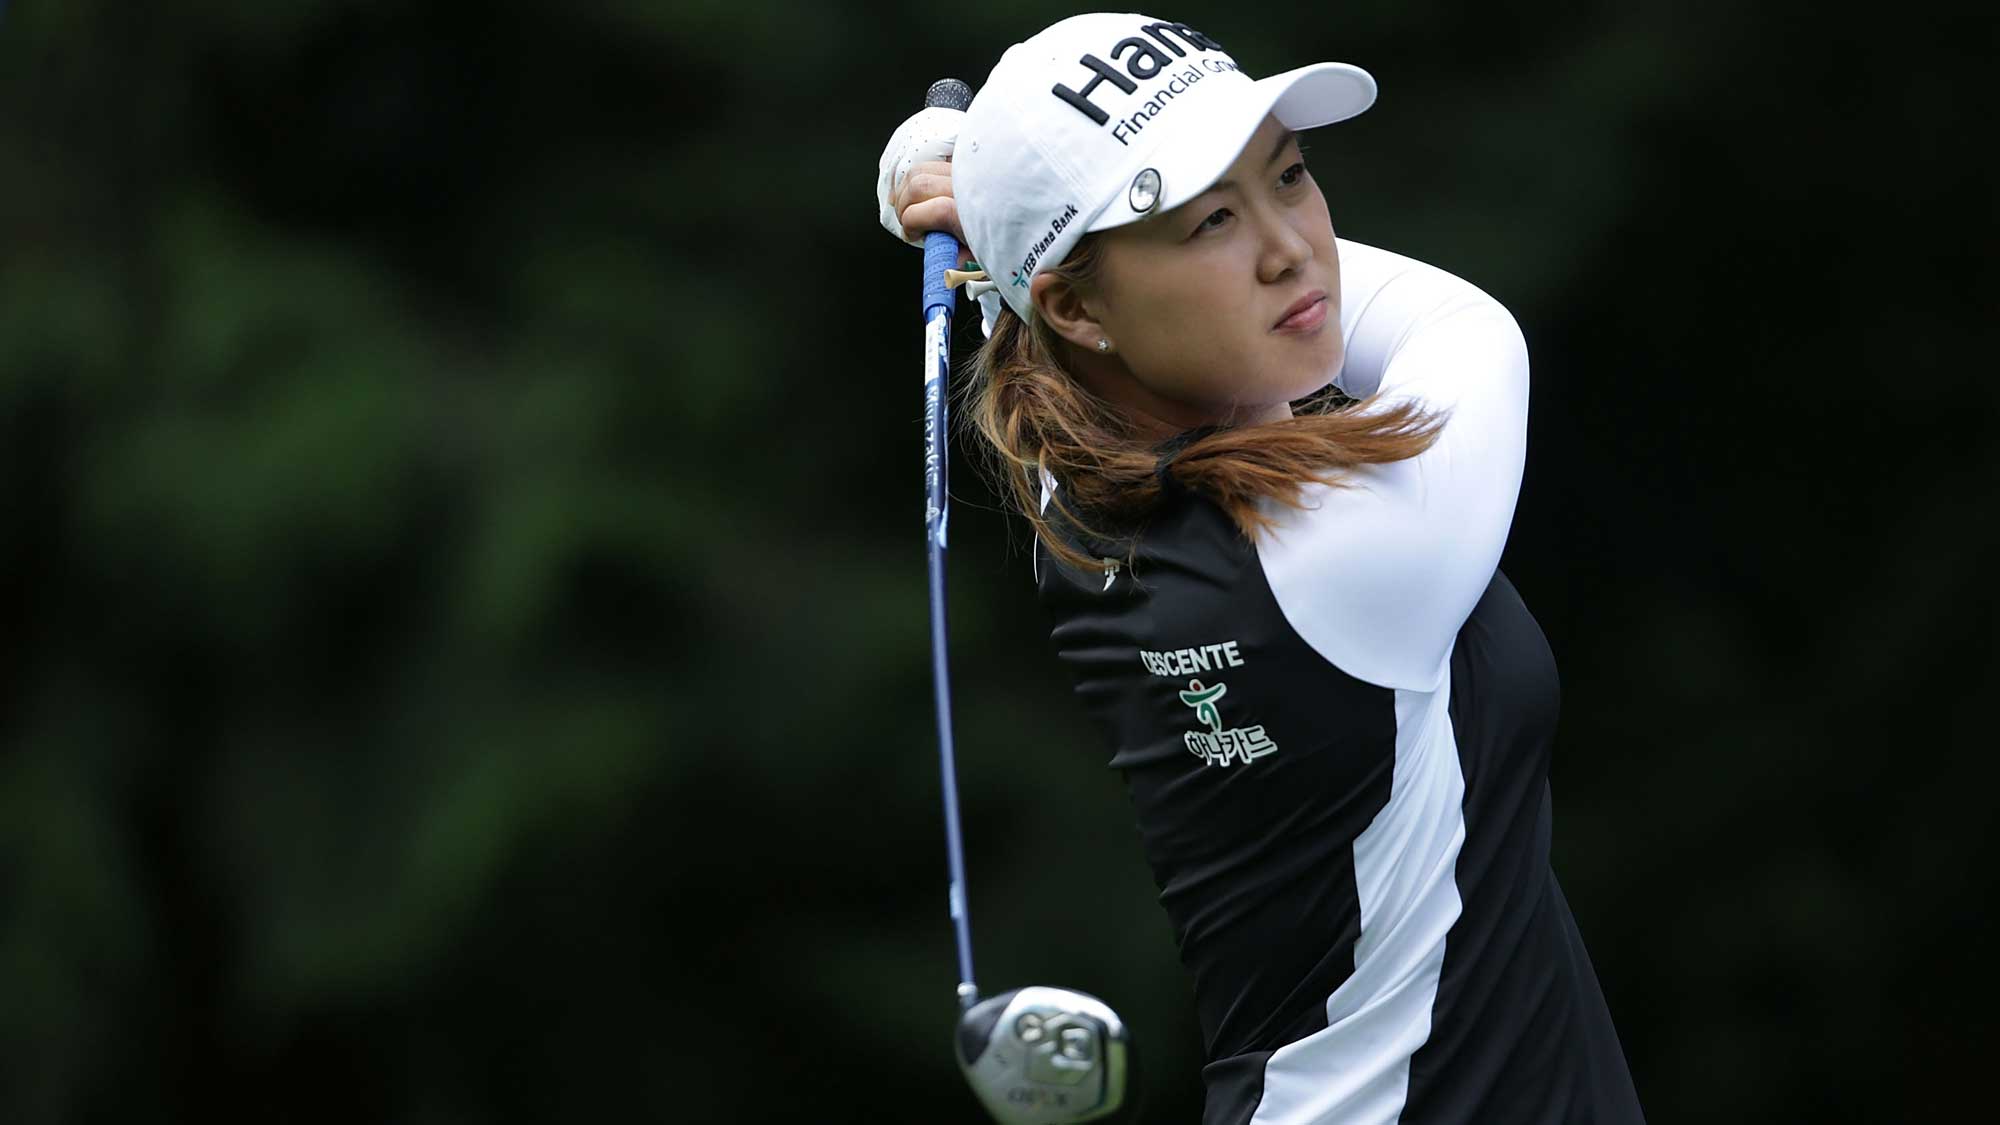 Minjee Lee of Australia hits a tee shot on the third hole during the second round of the KPMG Women's PGA Championship